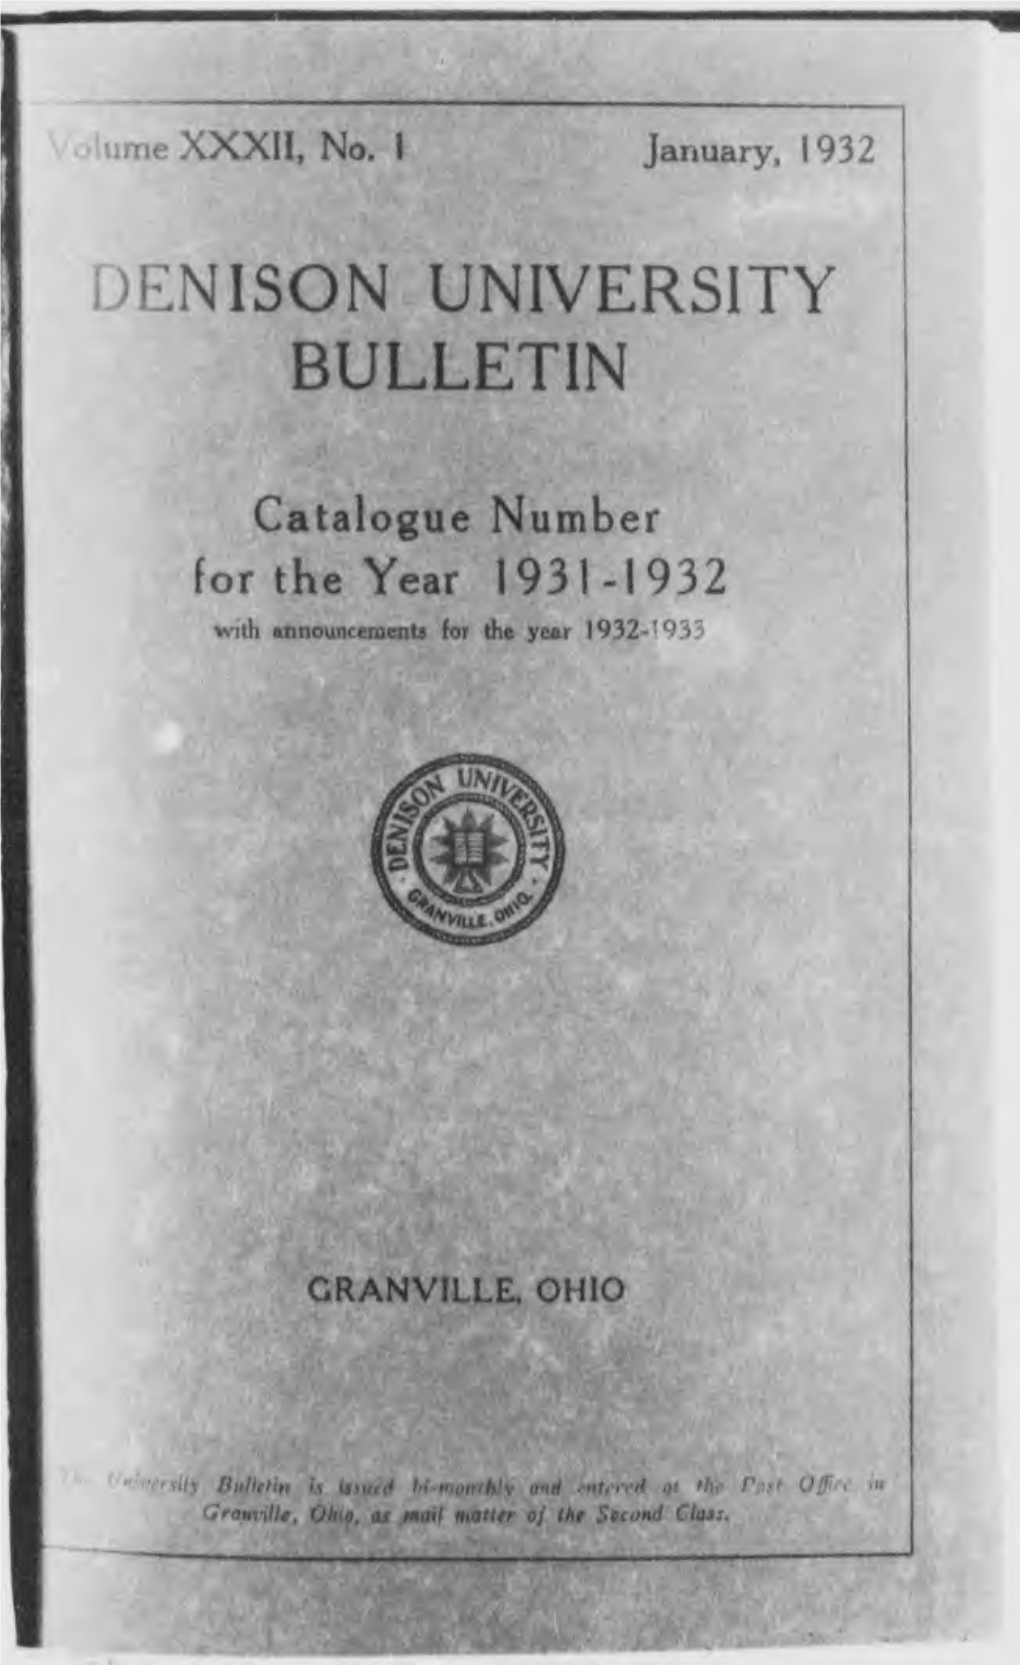 Denison University Bulletin Catalogue Number for the Year 1931-1932